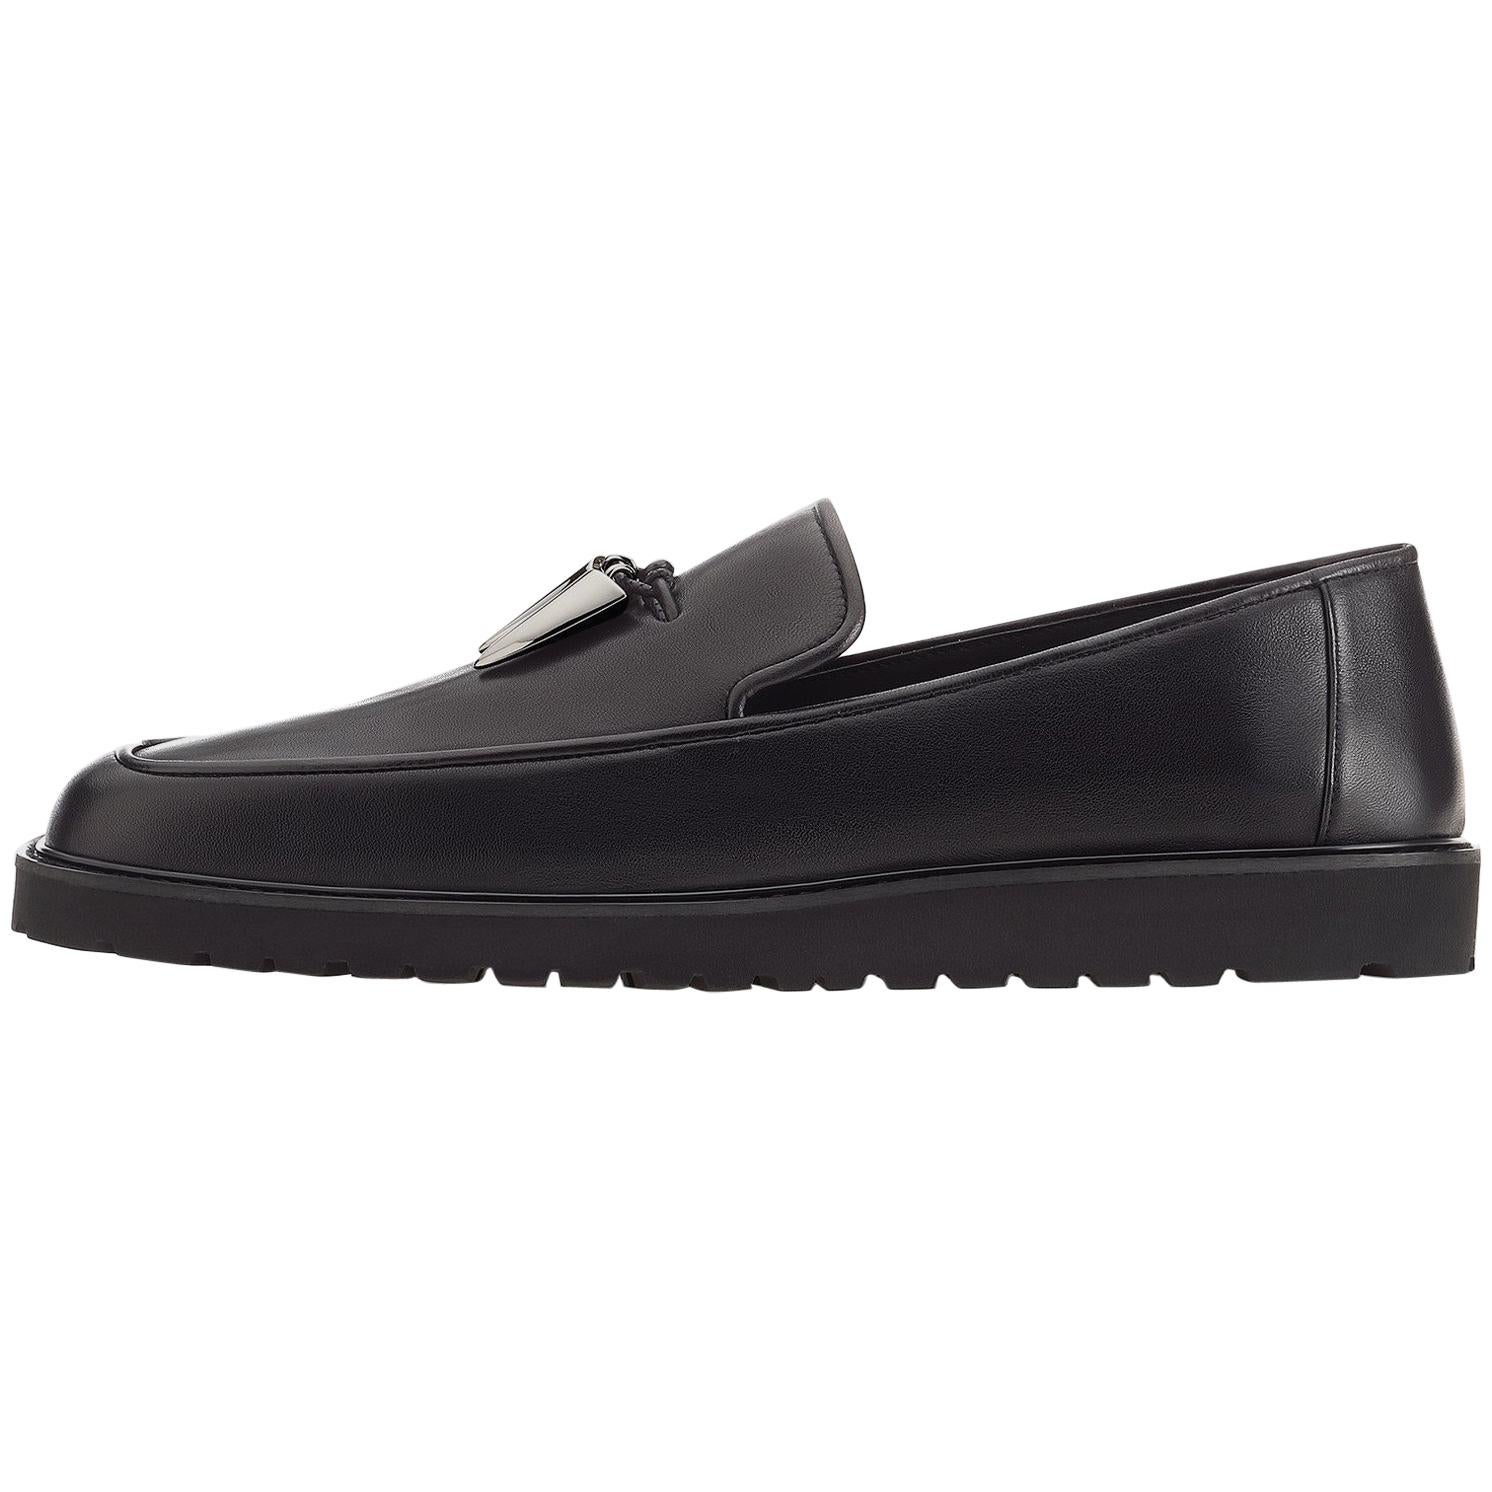 Giuseppe Zanotti New Black Leather Silver Tooth Men's Loafers Shoes 